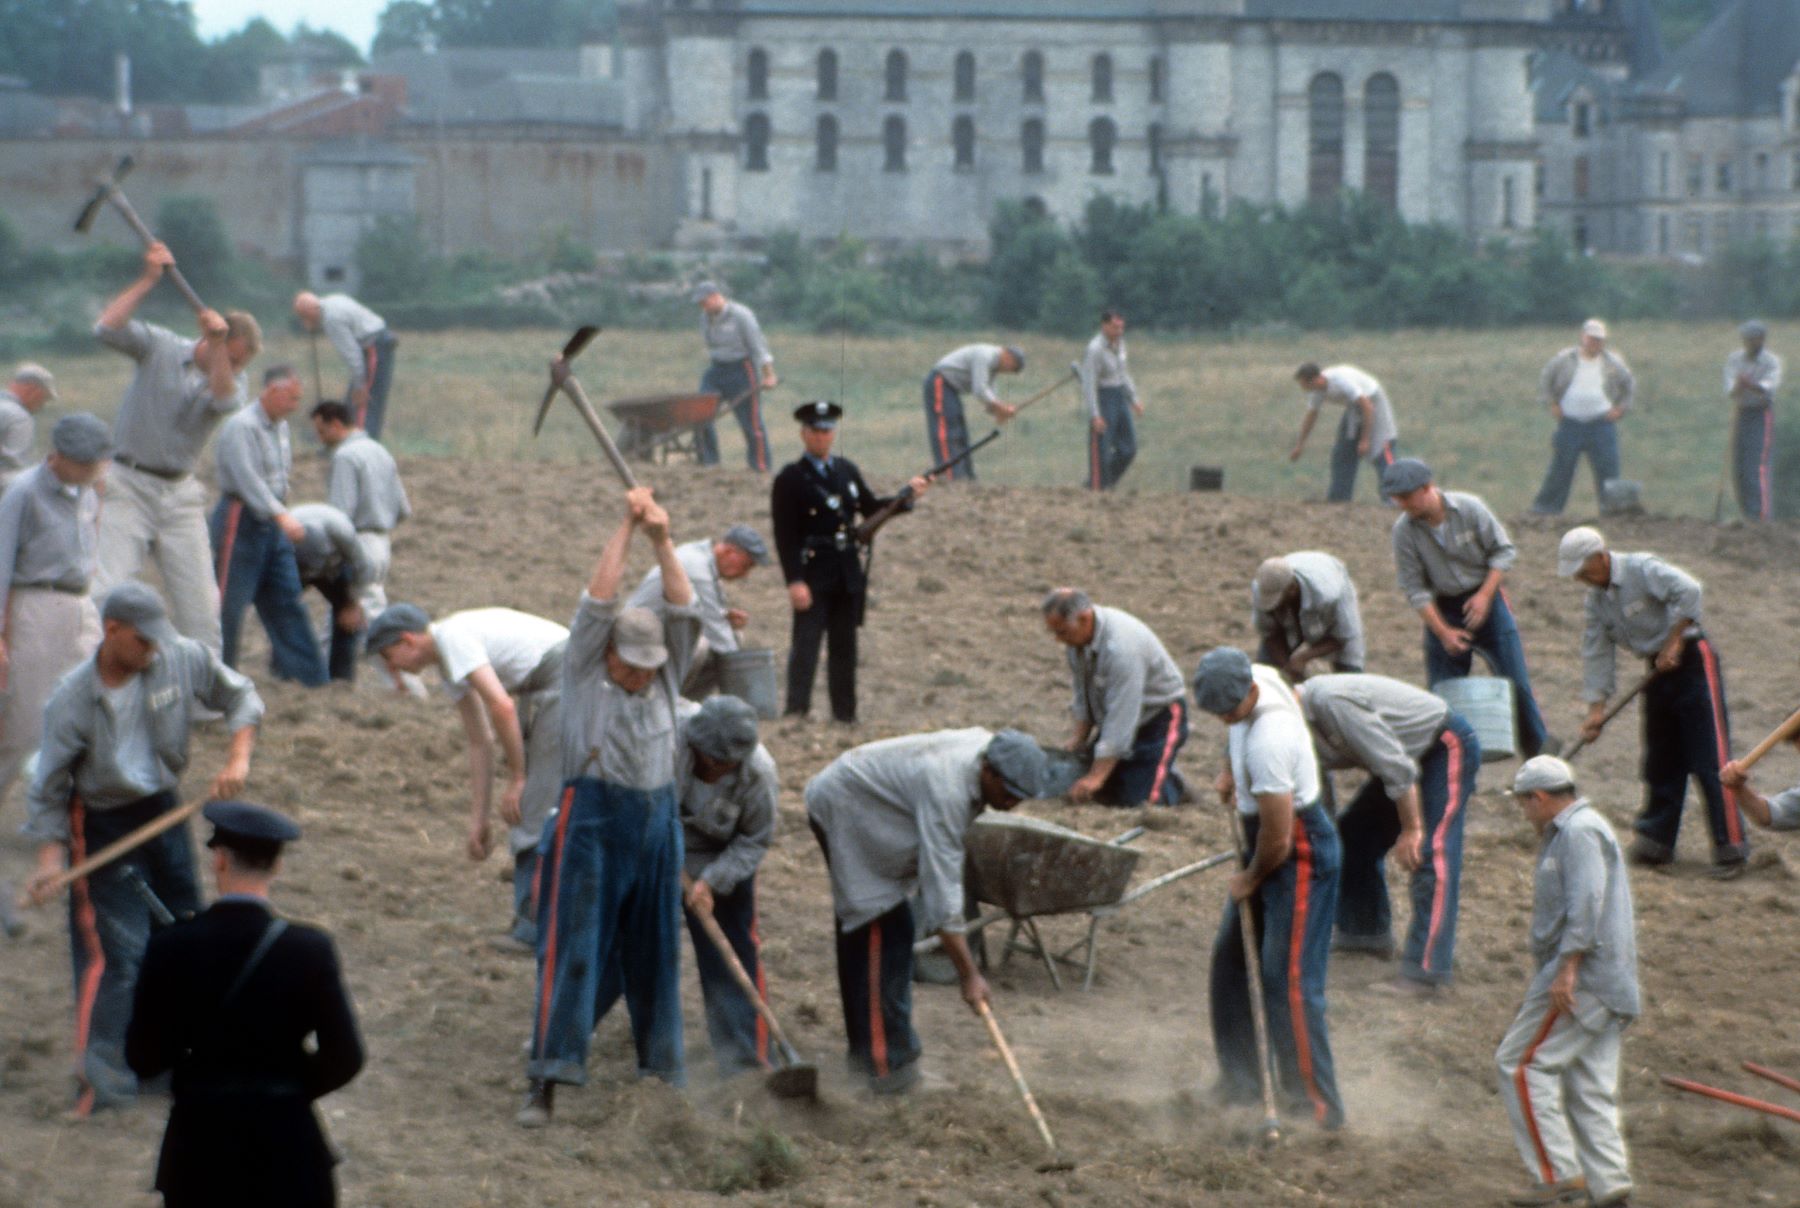 Prisoners working and digging in a field outside of the prison in 'The Shawshank Redemption'